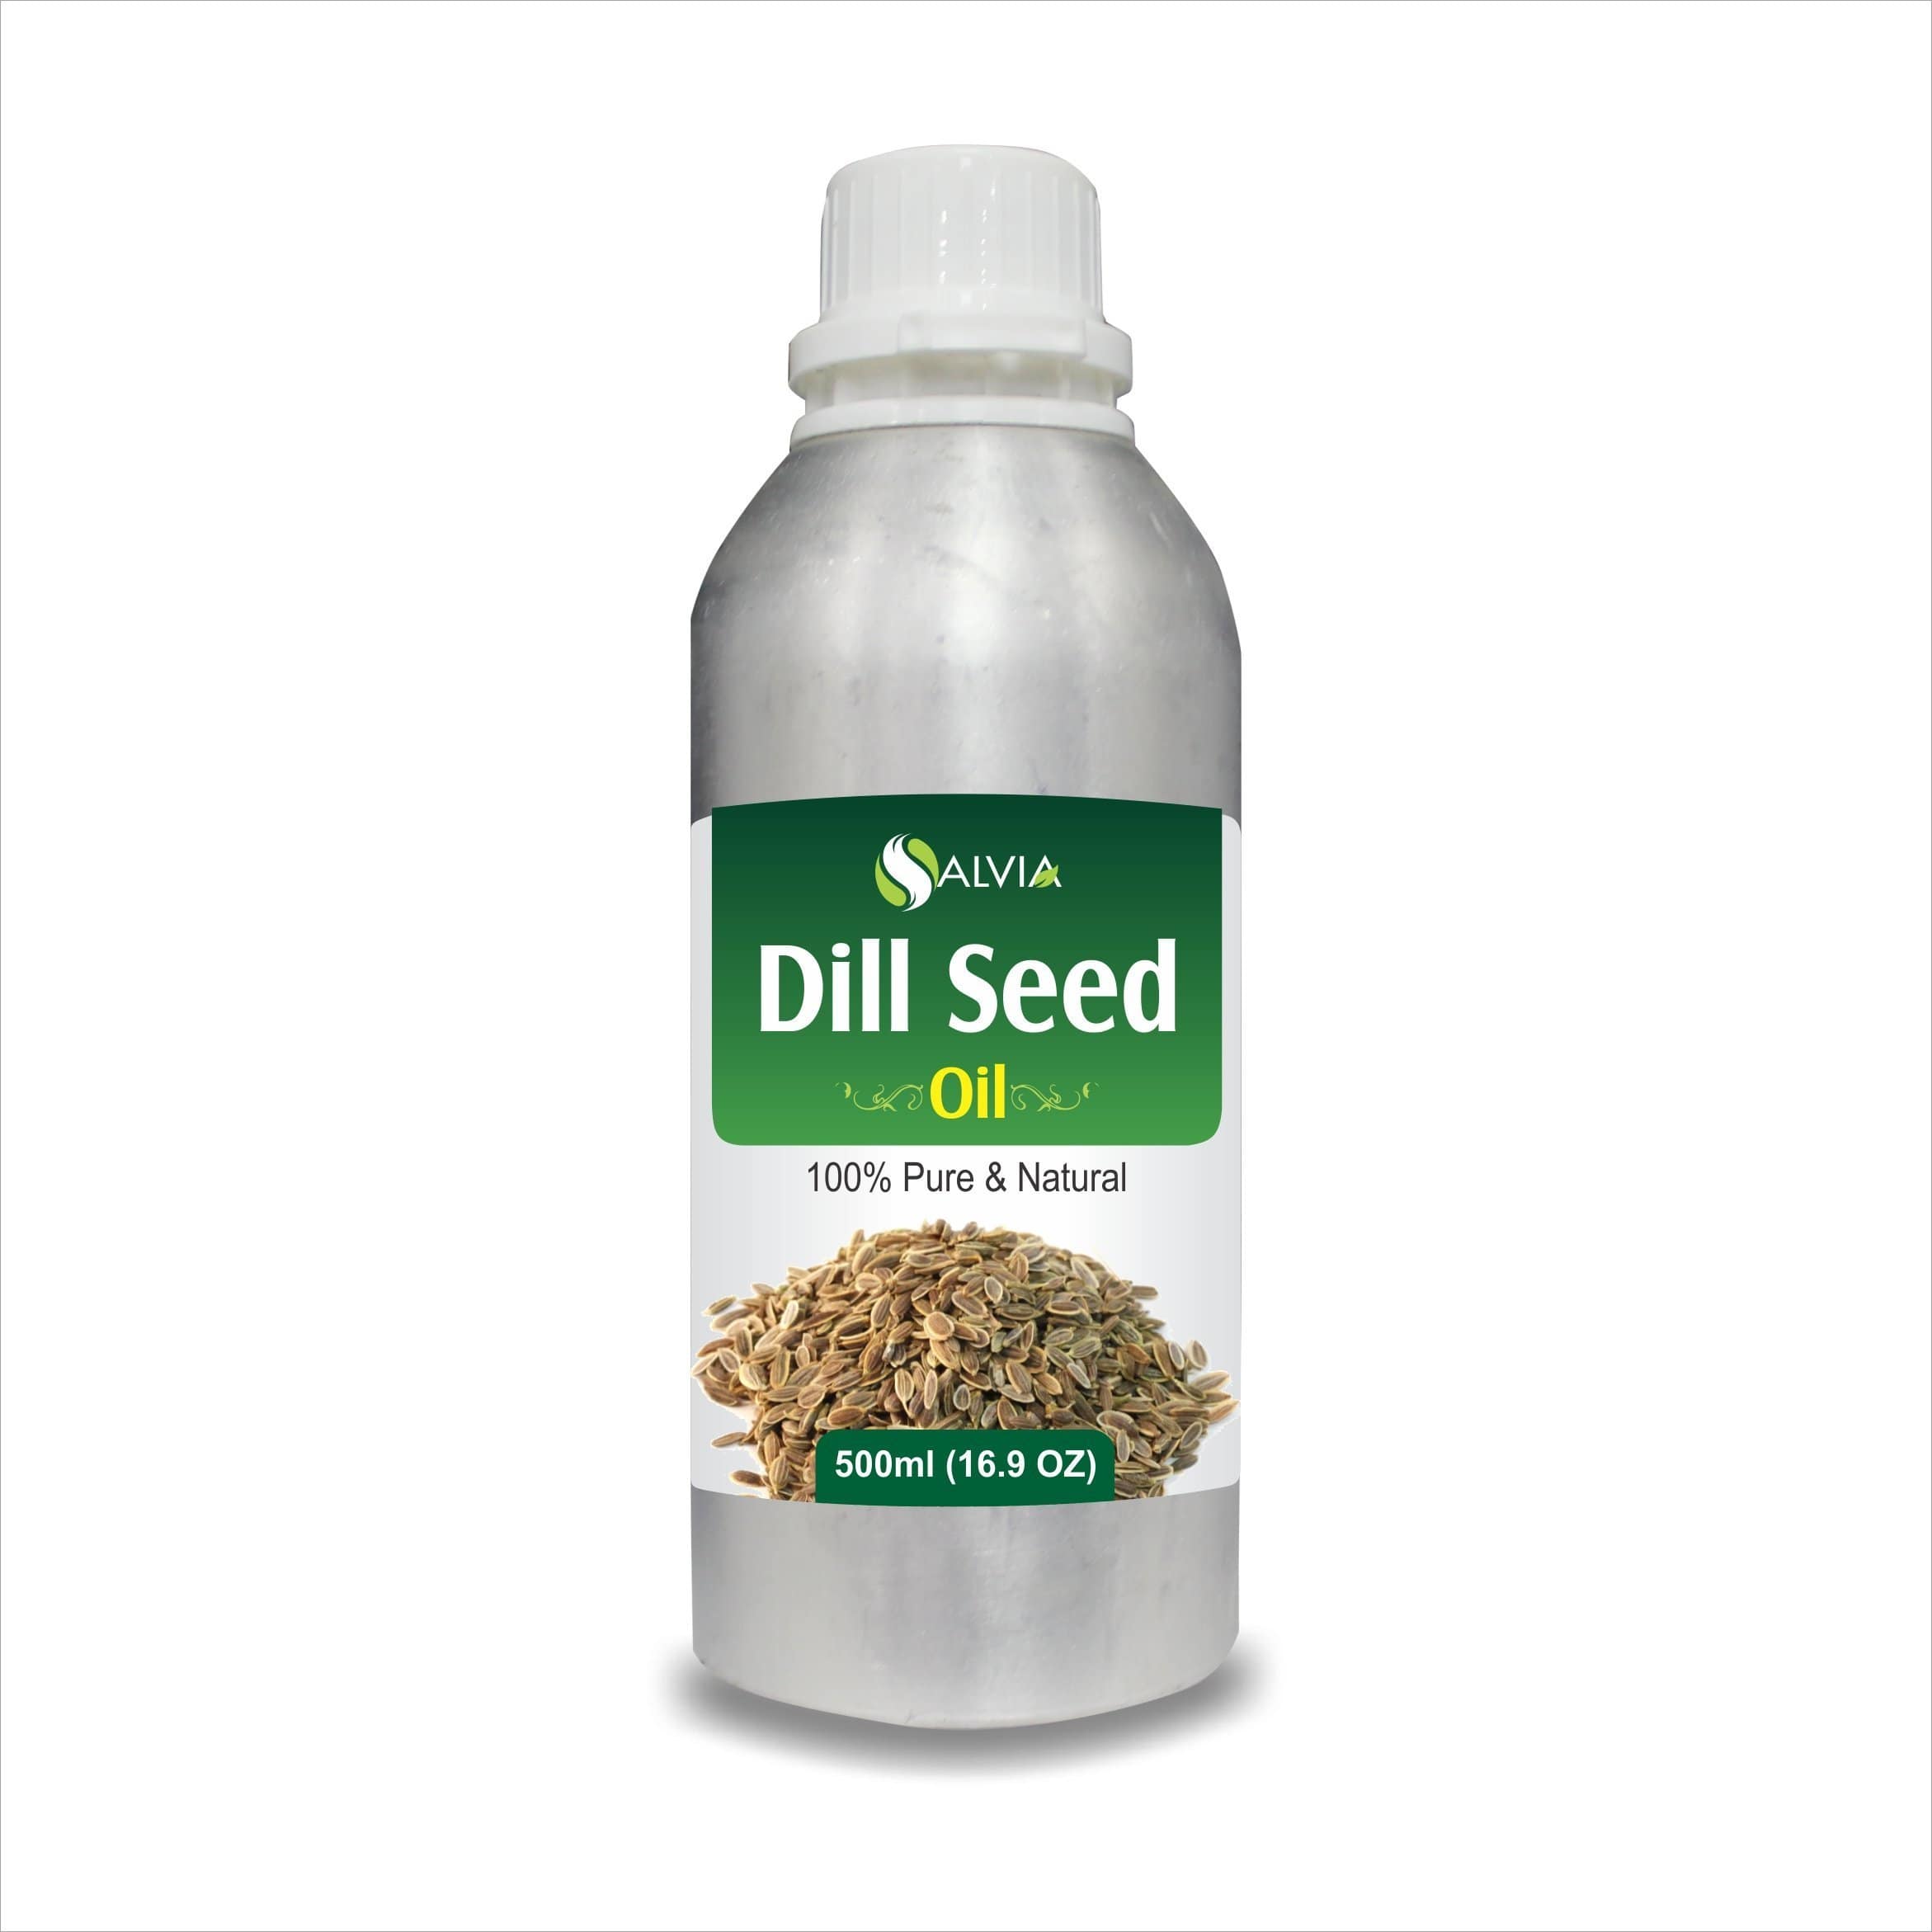 dill seeds